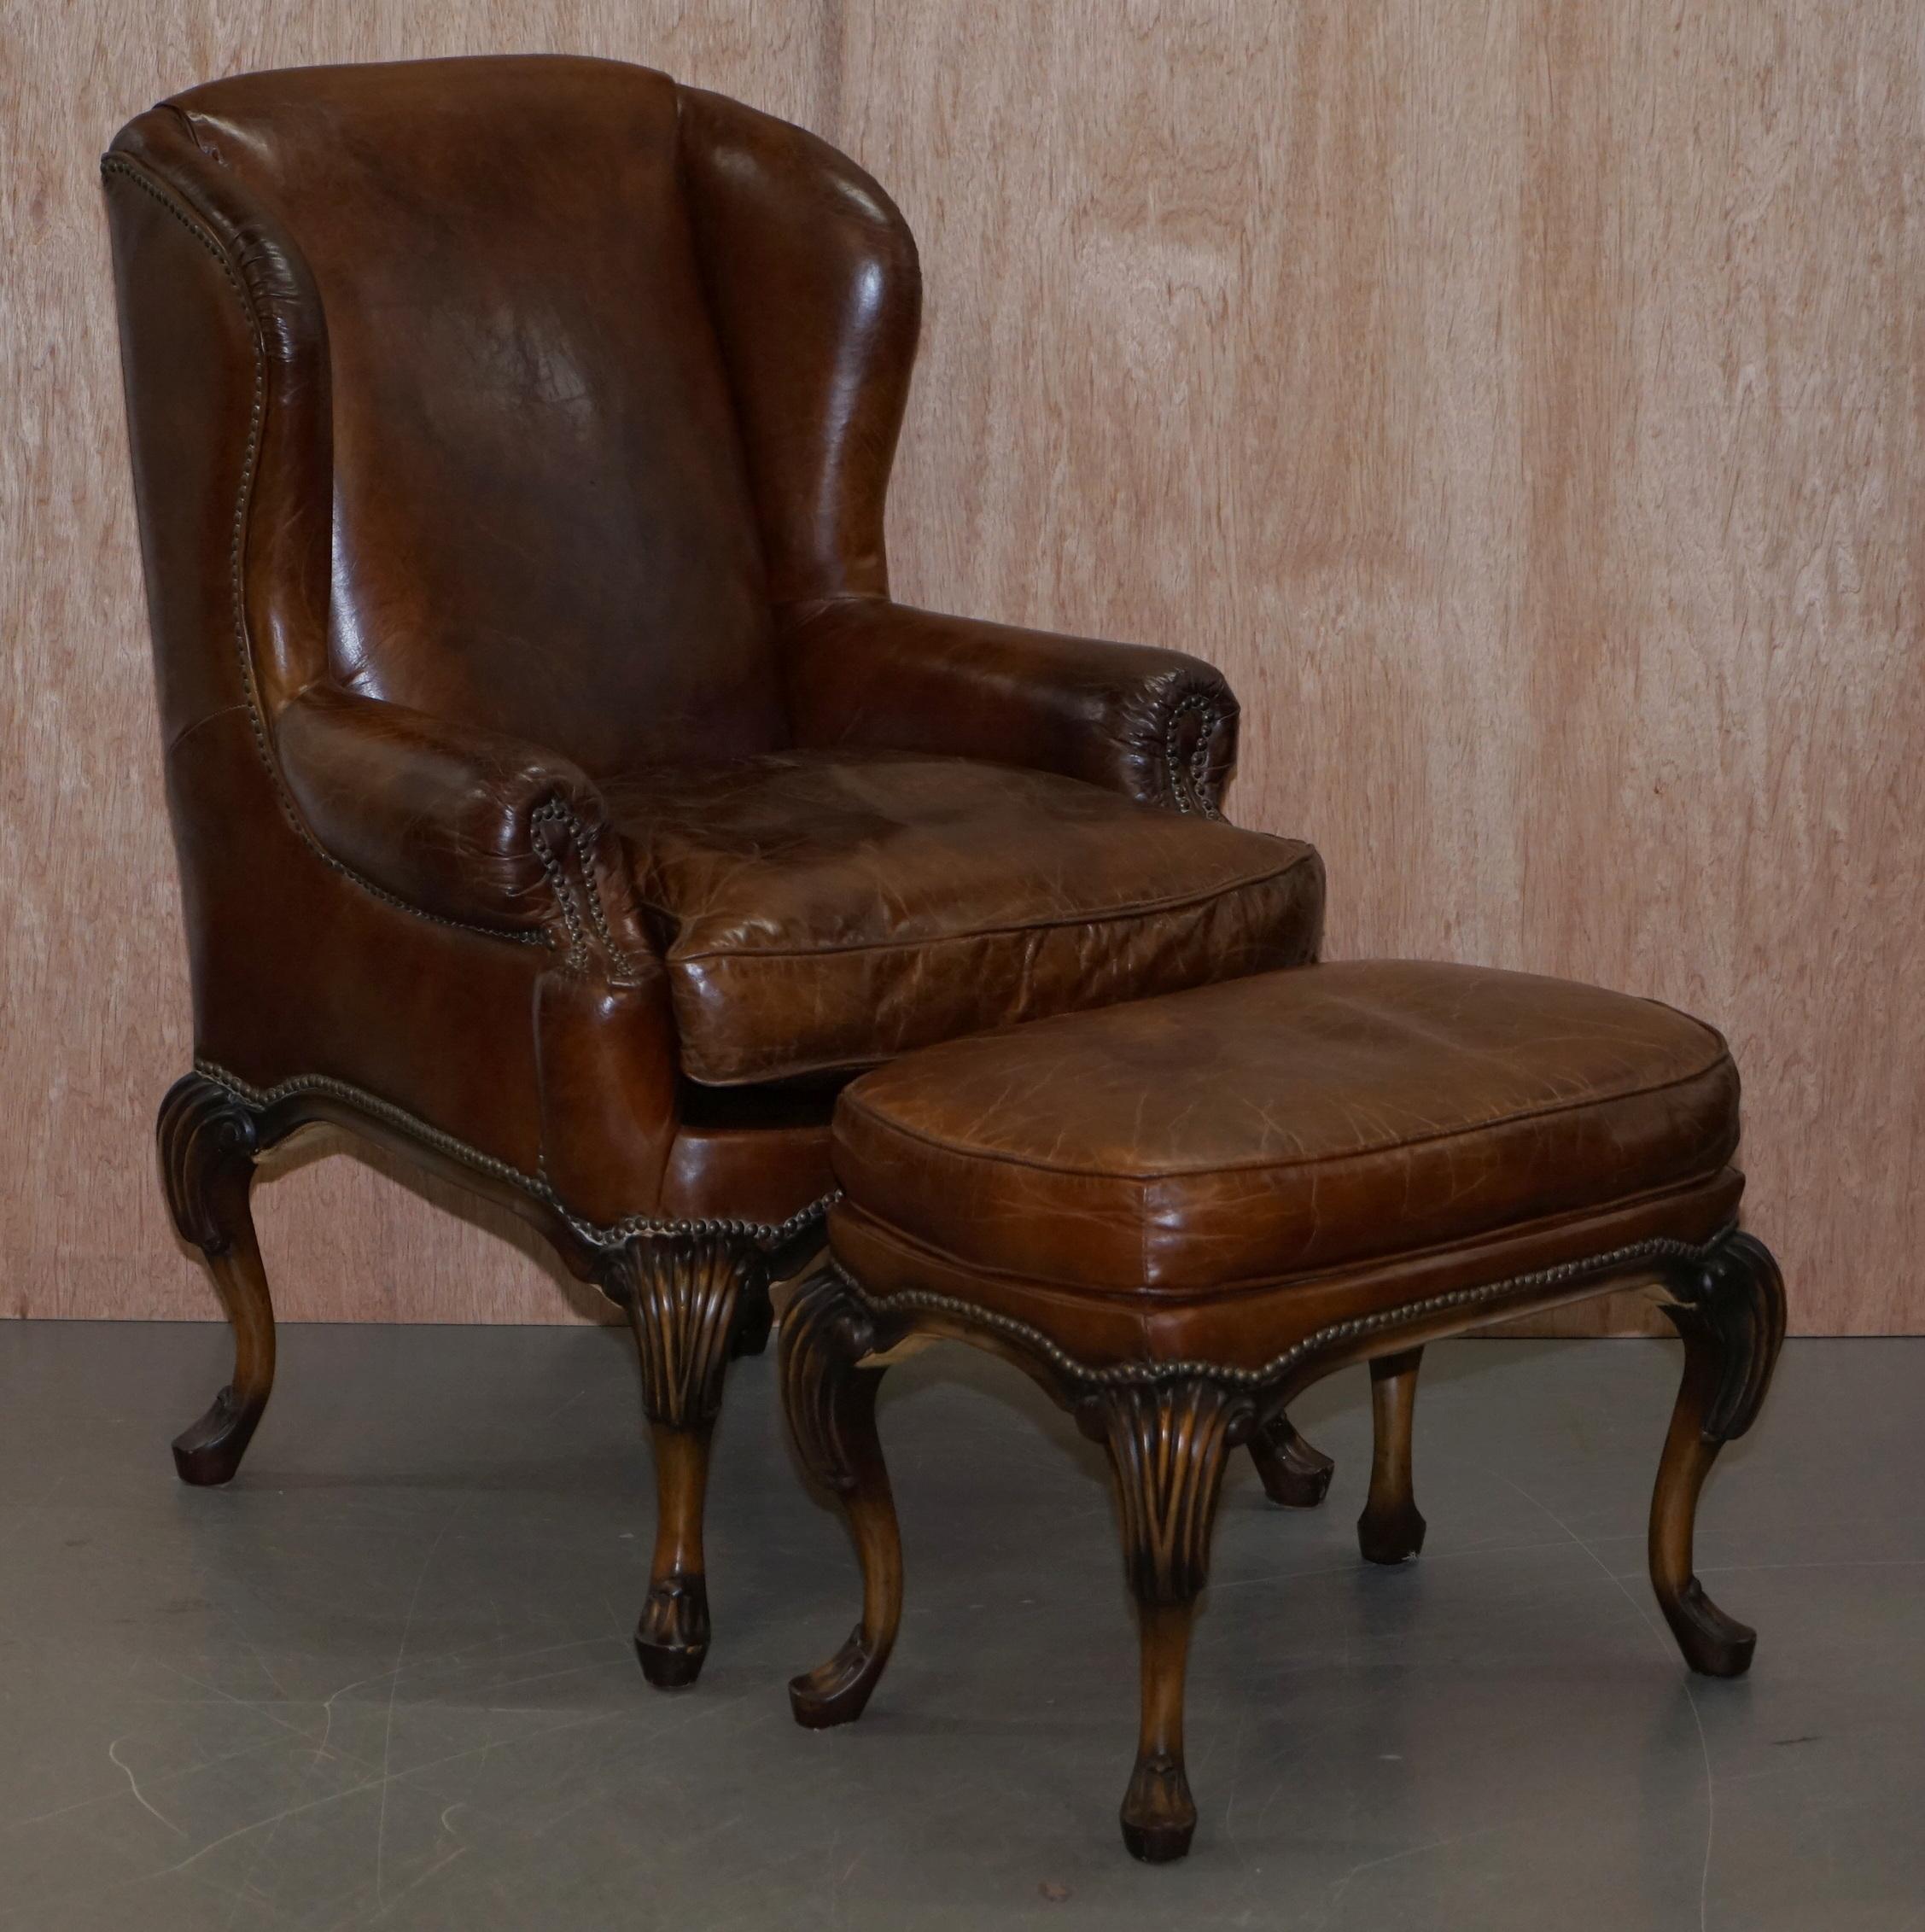 We are delighted to offer for sale this lovely pair of heritage brown distressed leather wingback armchairs with matching footstools

A very decorative comfortable and good looking suite, the leather is heritage leather so its designed to look 100